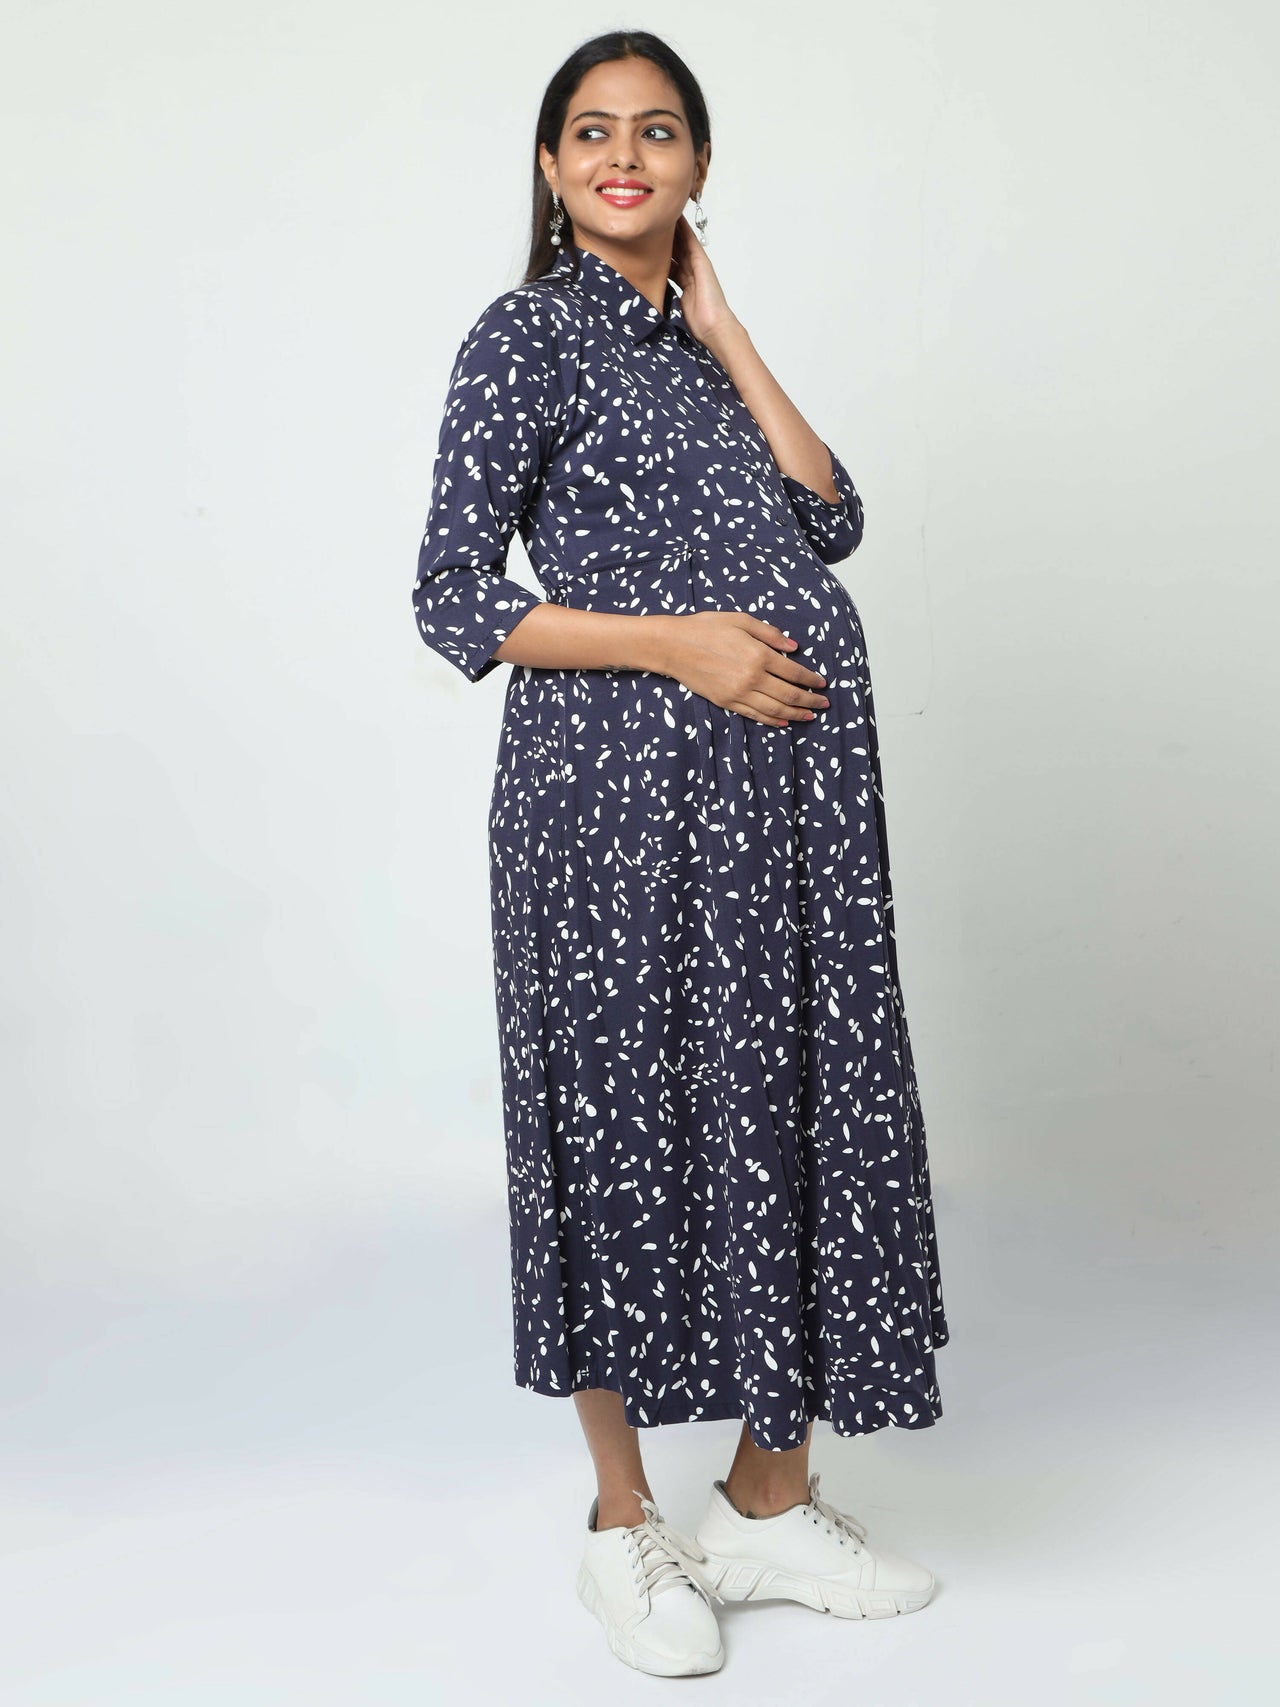 Manet Three Fourth Maternity Dress White Dot Print With Concealed Zipper Nursing Access - Navy Blue - Distacart